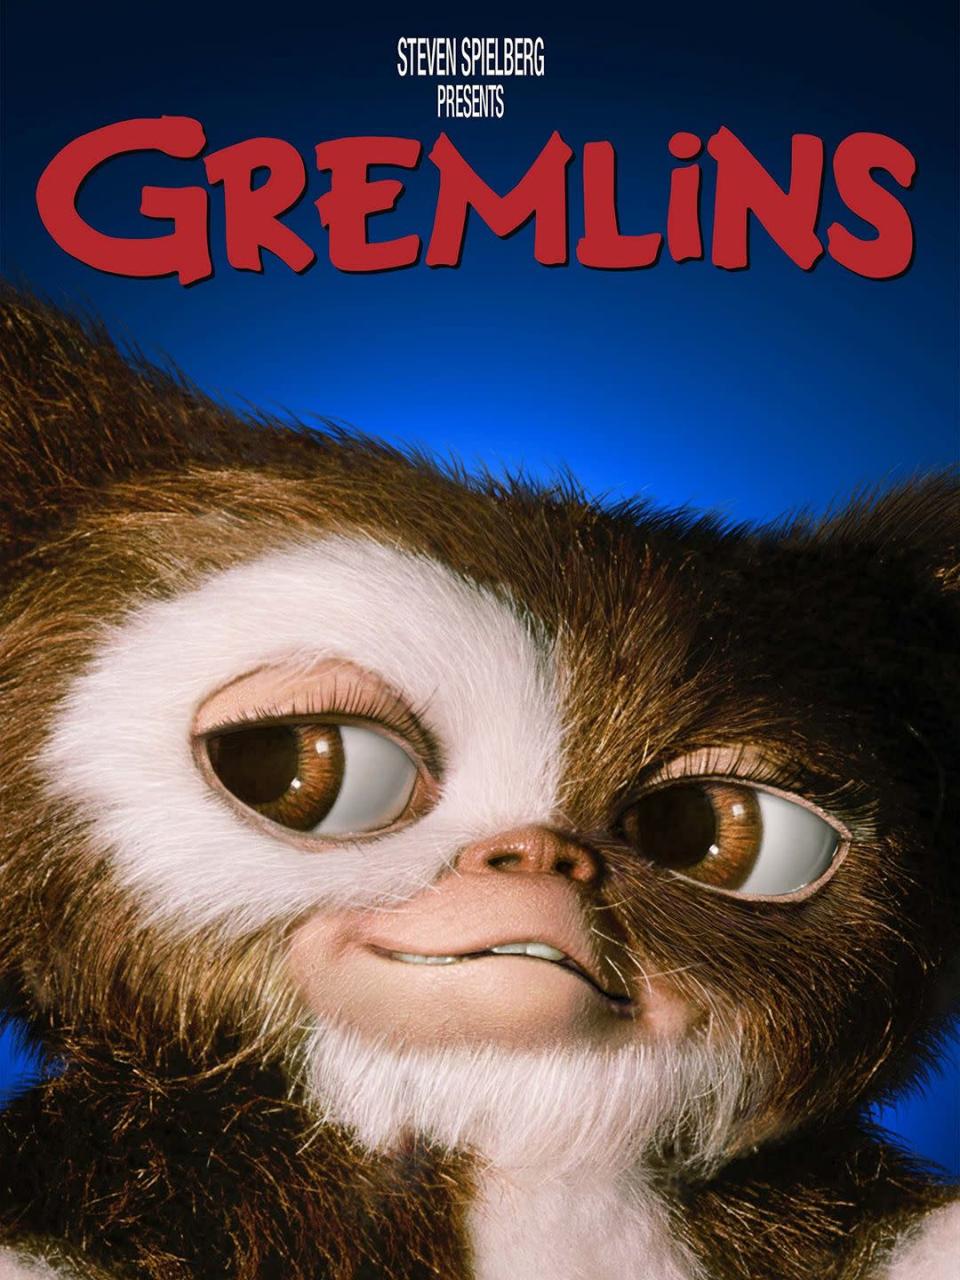 <p>In this holiday(ish) horror movie, a cute and fuzzy present spawns evil offspring that ruin Christmas Eve after a boy breaks three important rules. </p><p><a class="link rapid-noclick-resp" href="https://www.amazon.com/Gremlins-Zach-Galligan/dp/B00KQ9ZW4O/?tag=syn-yahoo-20&ascsubtag=%5Bartid%7C10067.g.38414559%5Bsrc%7Cyahoo-us" rel="nofollow noopener" target="_blank" data-ylk="slk:WATCH NOW">WATCH NOW</a> </p>